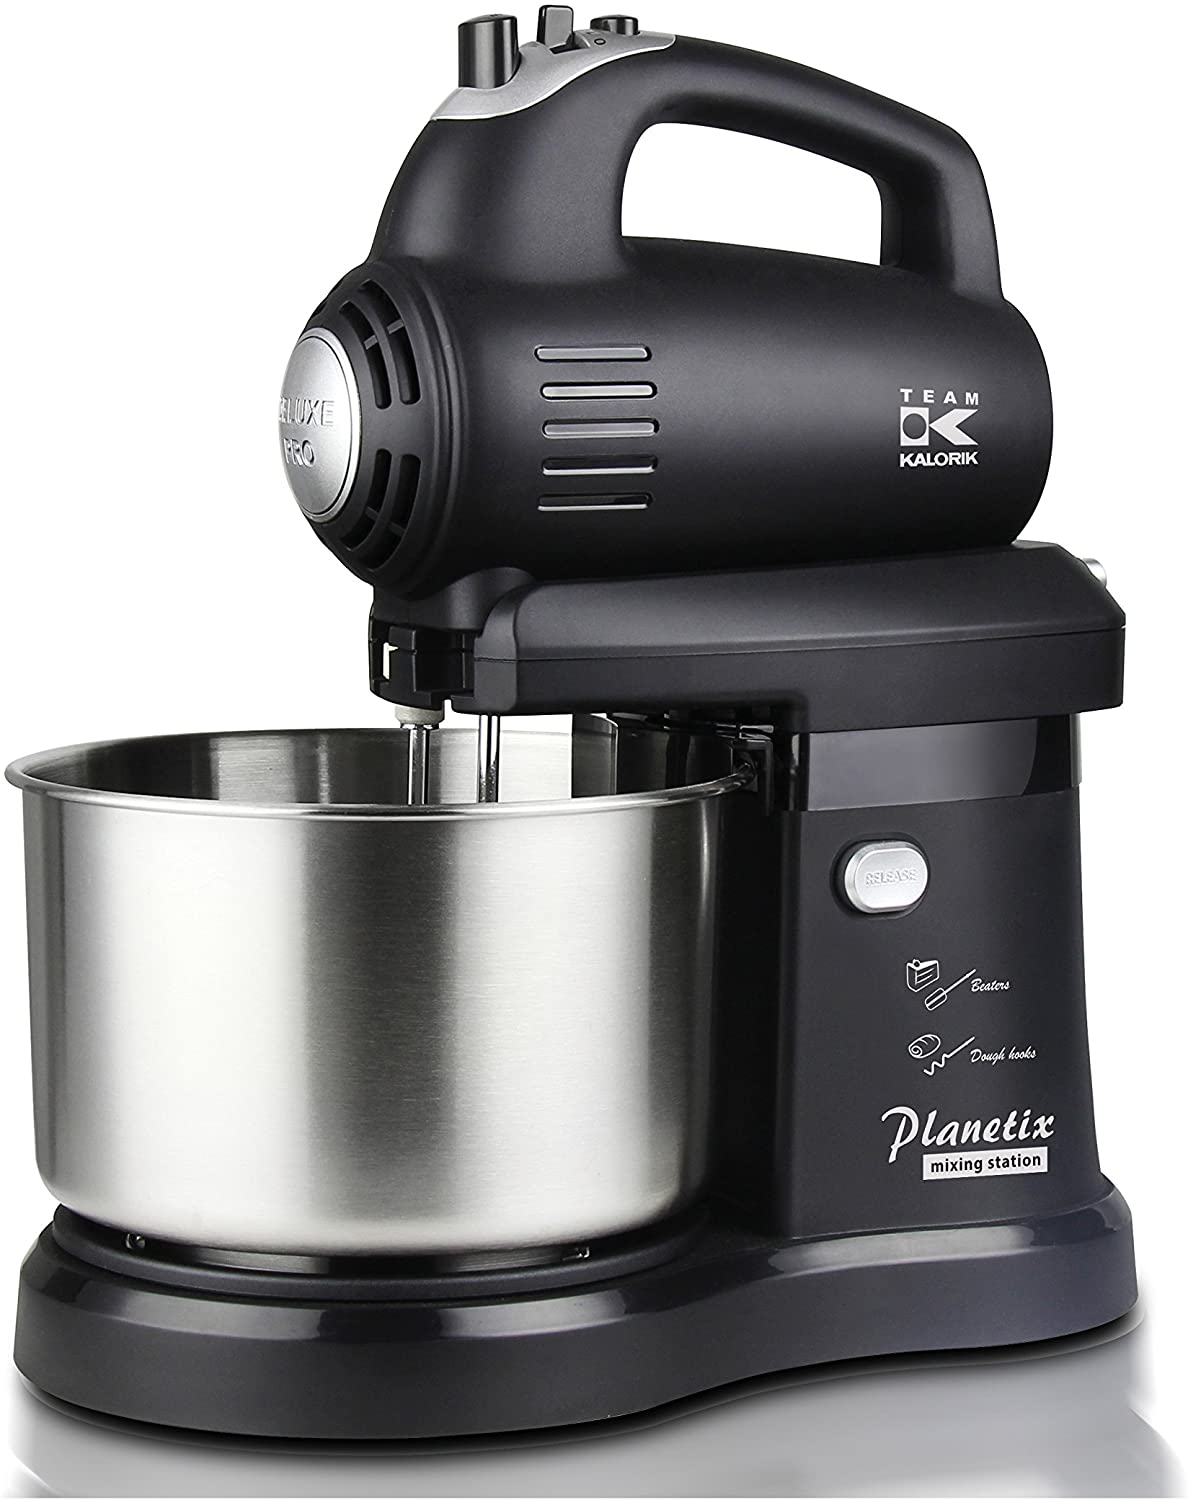 Team Kalorik TKG M 1007 B 2-in-1 Food Processor and Hand Mixer with Innovative Left/Right Swivel Blender, Plastic, Stainless Steel, 2.8 Litres, Black